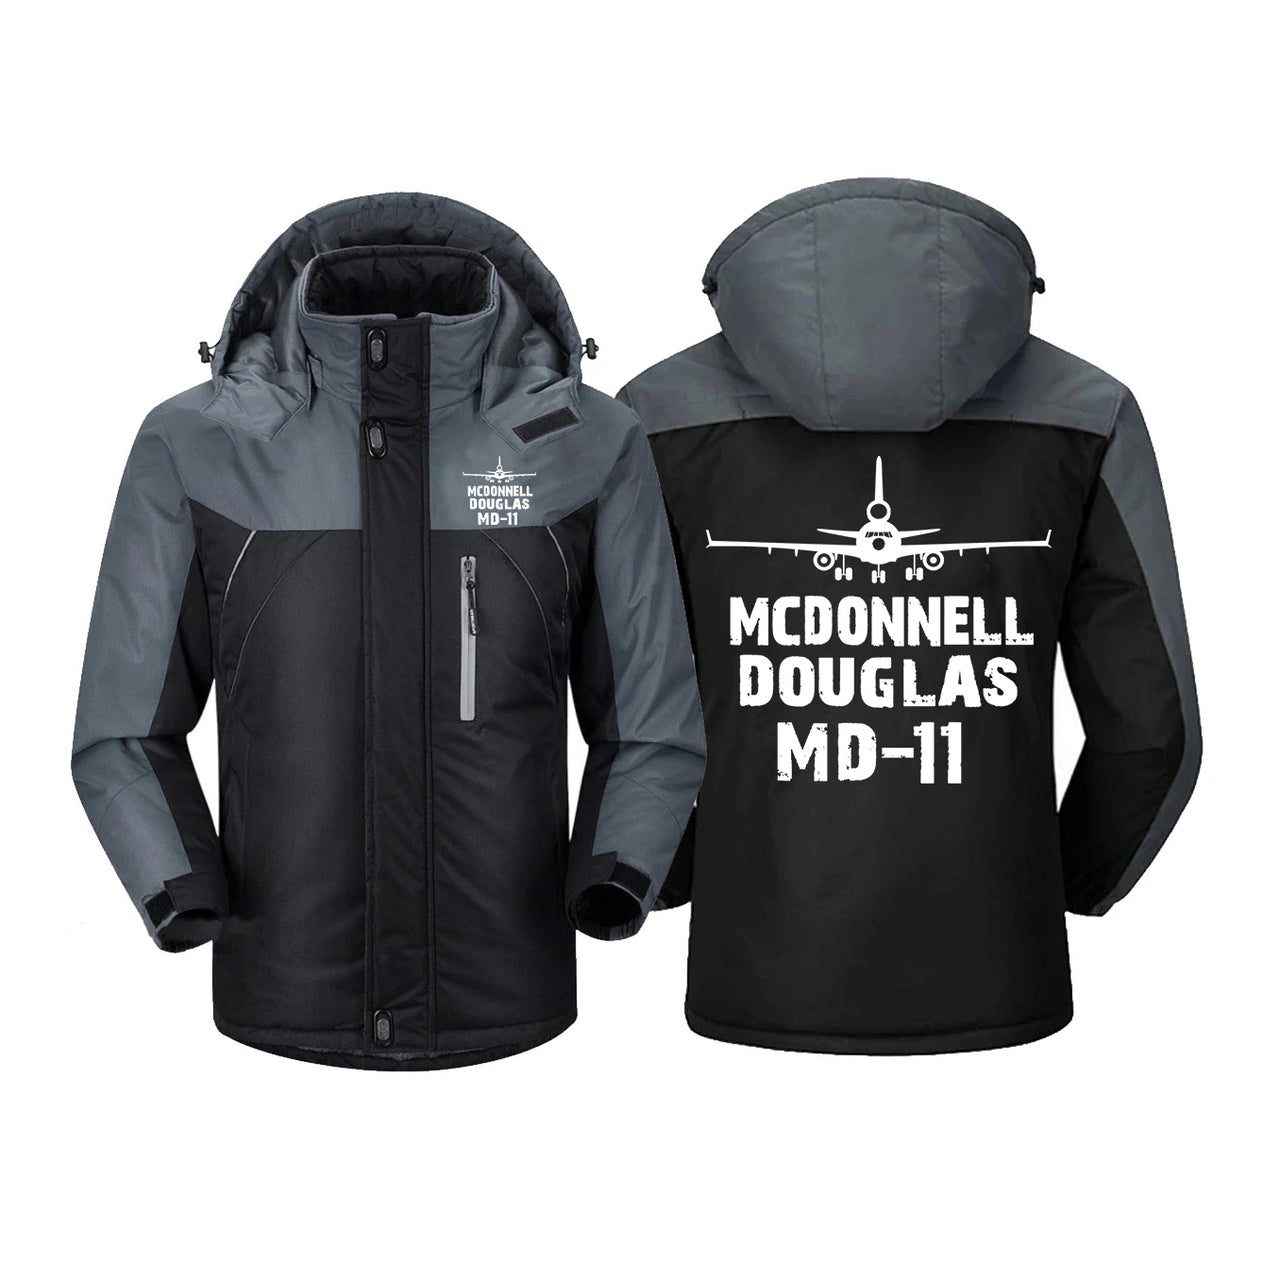 McDonnell Douglas MD-11 & Plane Designed Thick Winter Jackets